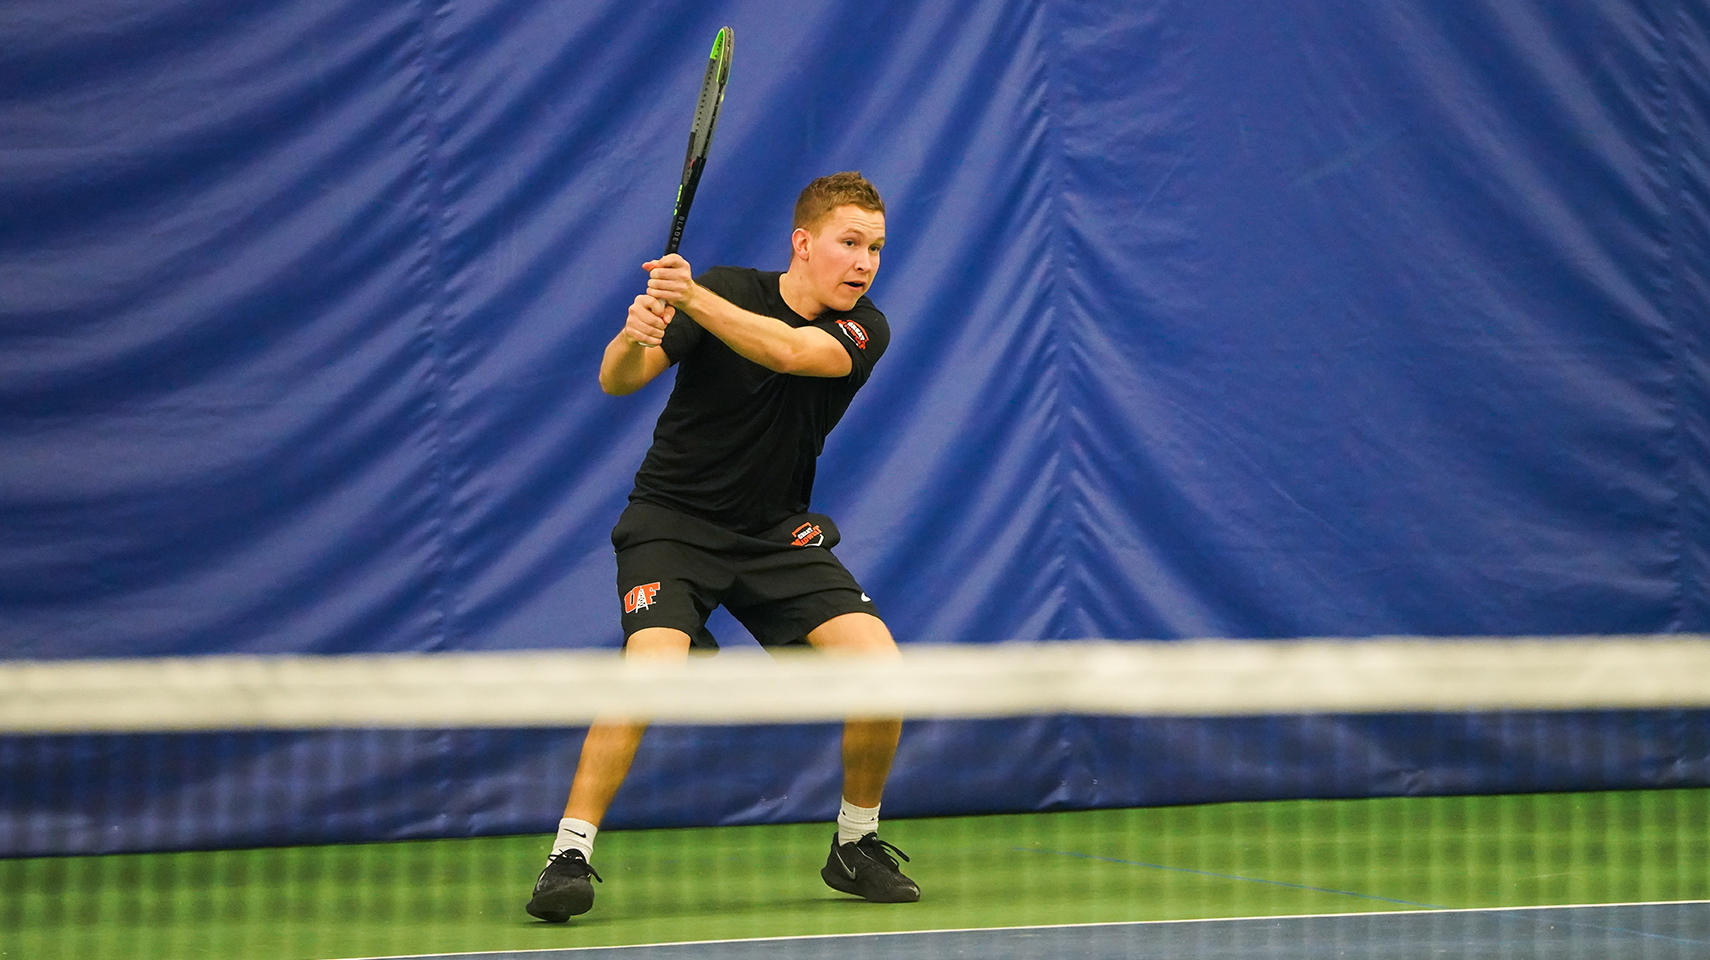 Men's tennis player with a backhand